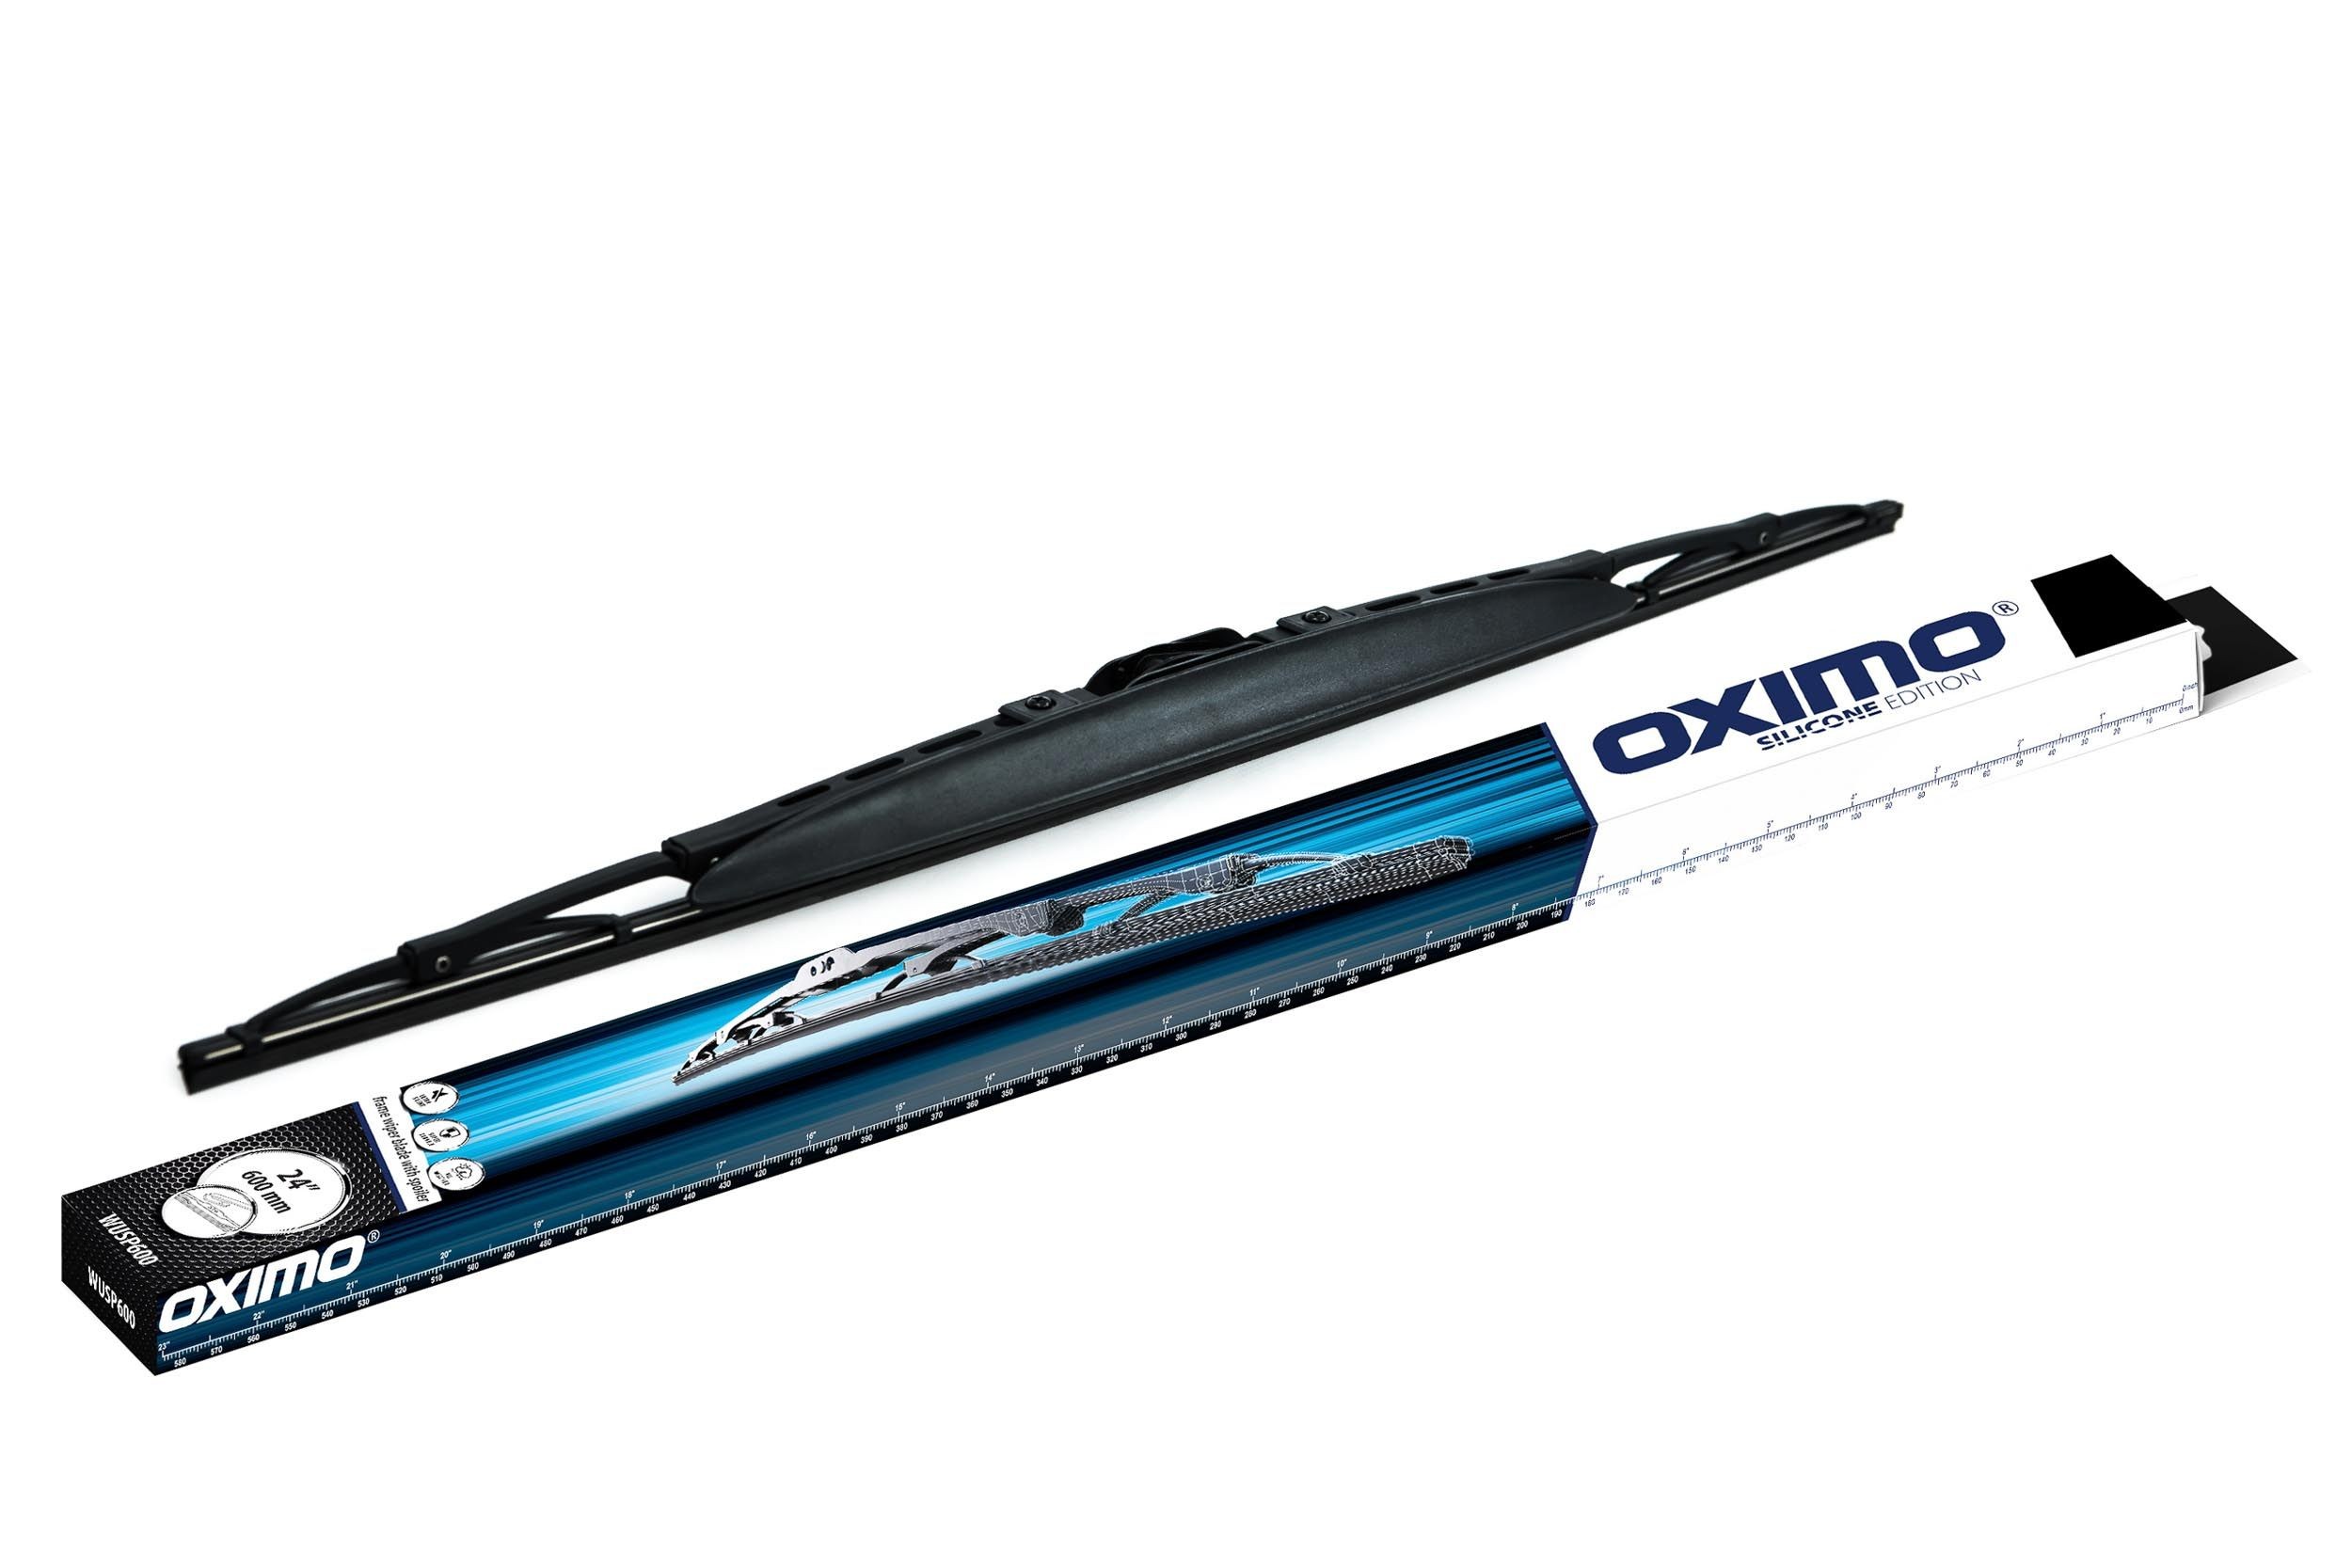 OXIMO 600 mm, Bracket wiper blade with spoiler Wiper blades WUSP600 buy